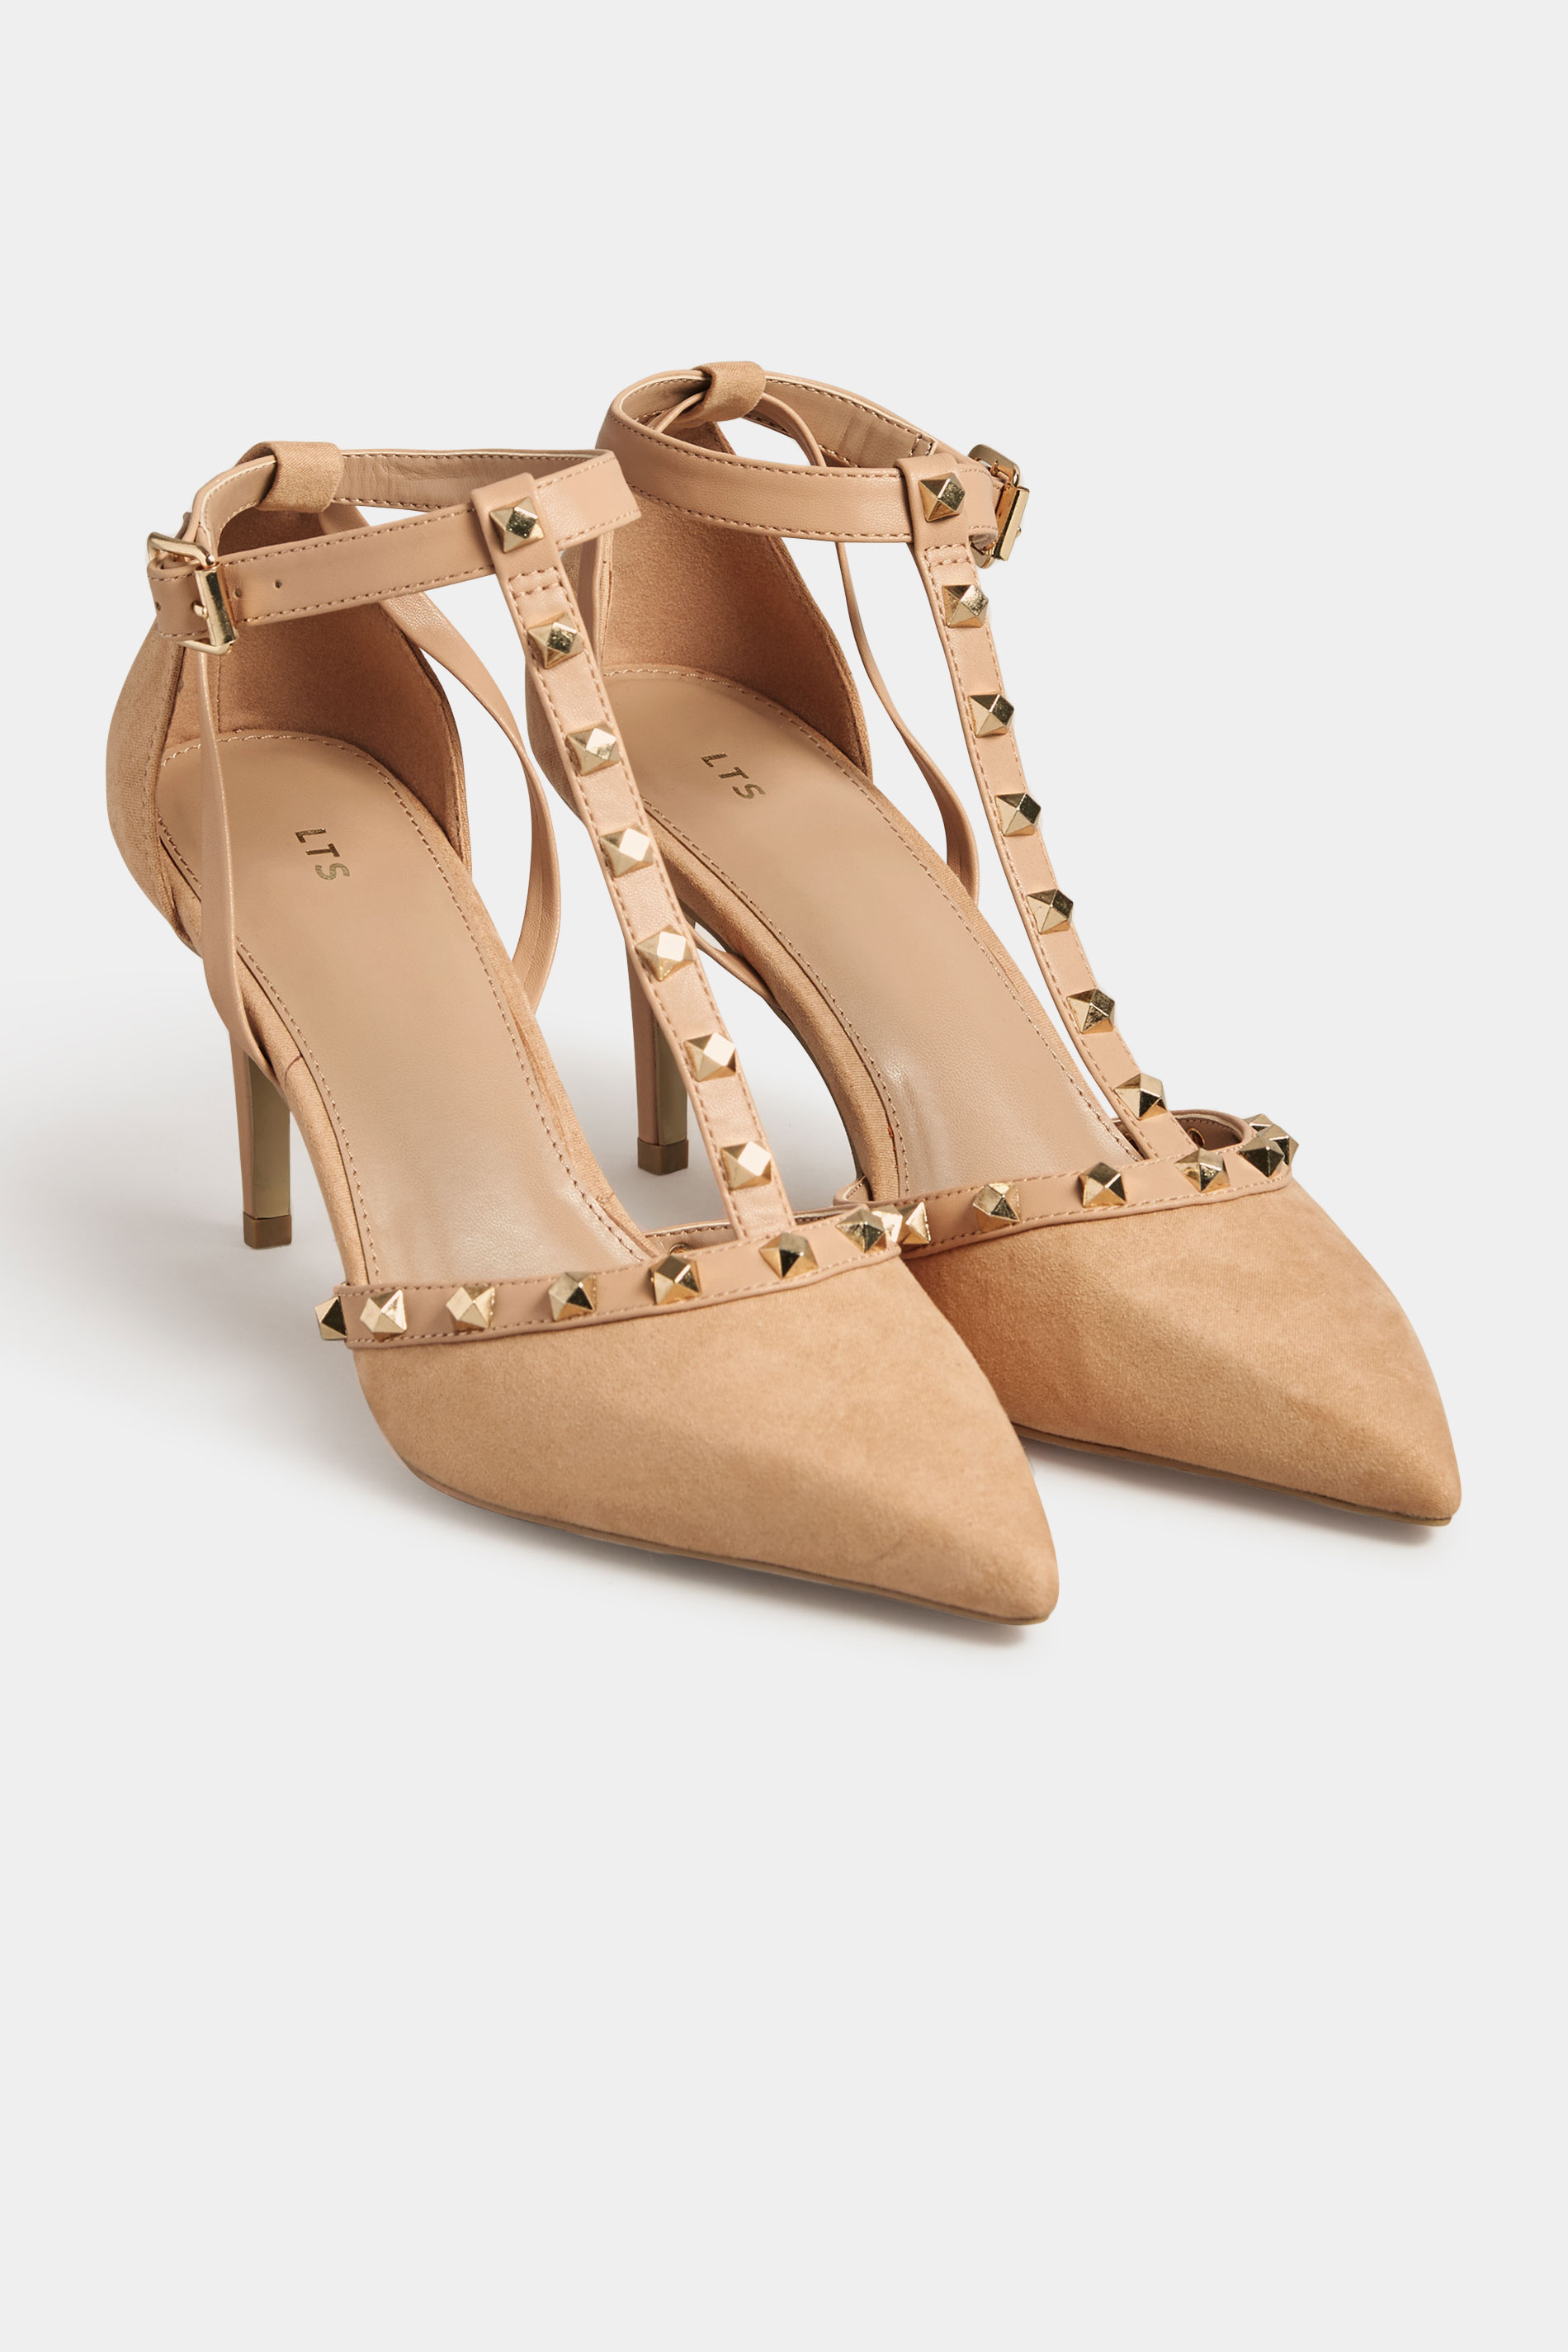 Lts Nude Studded T Bar Court Heel Shoes In Standard Fit Long Tall Sally